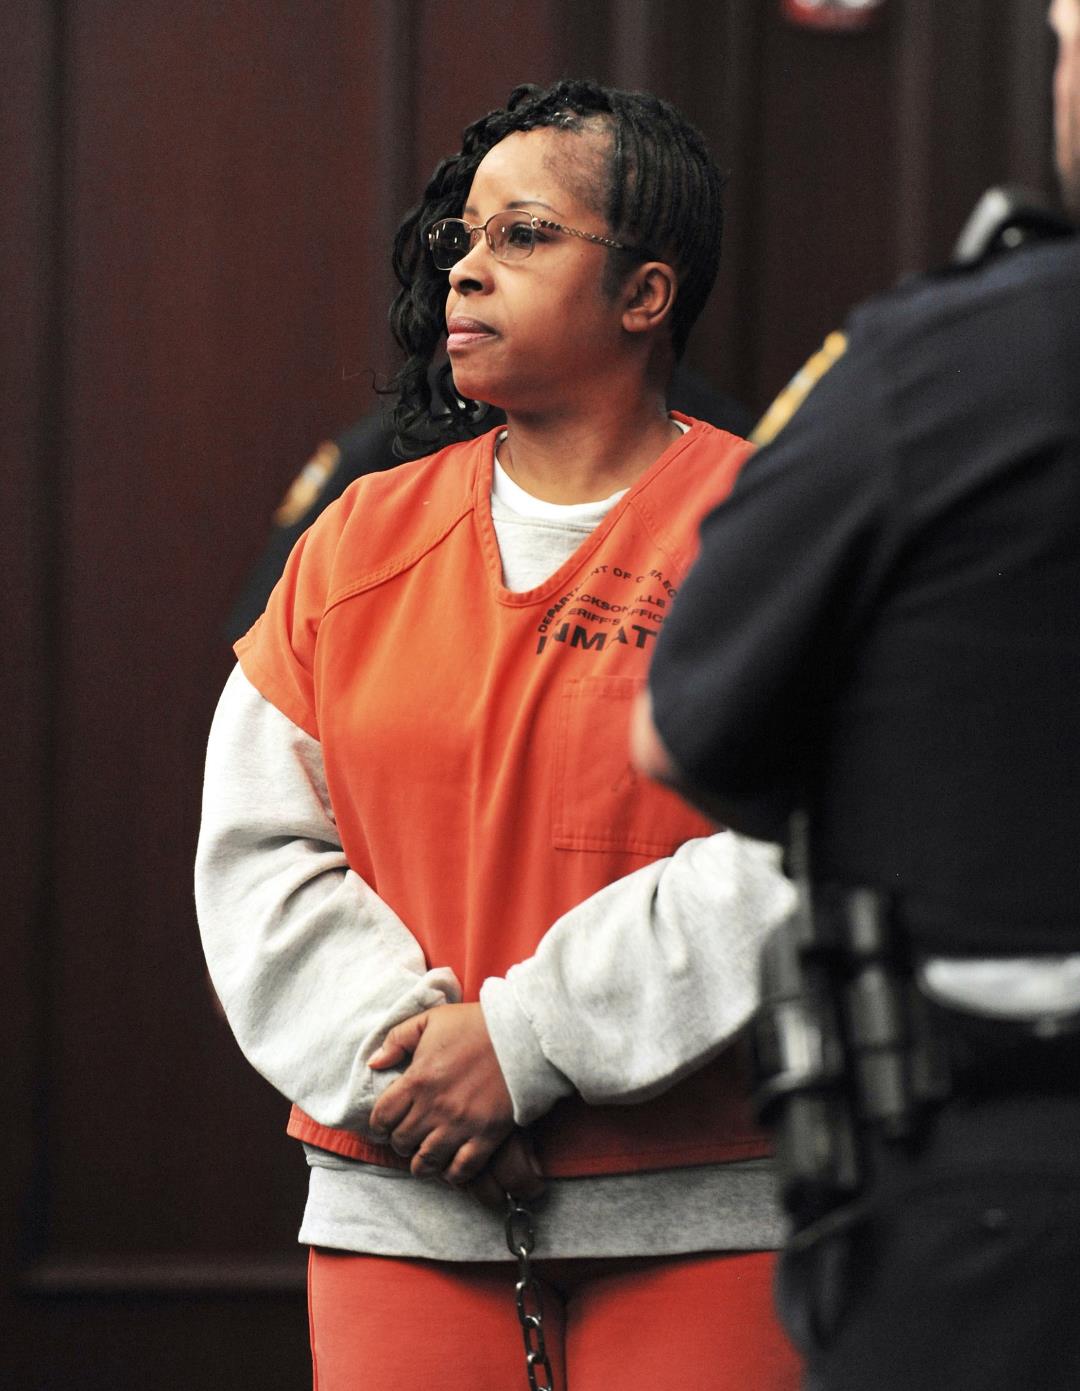 Gloria Williams Confesses to Kidnapping Kamiyah Mobley 20 Years Ago